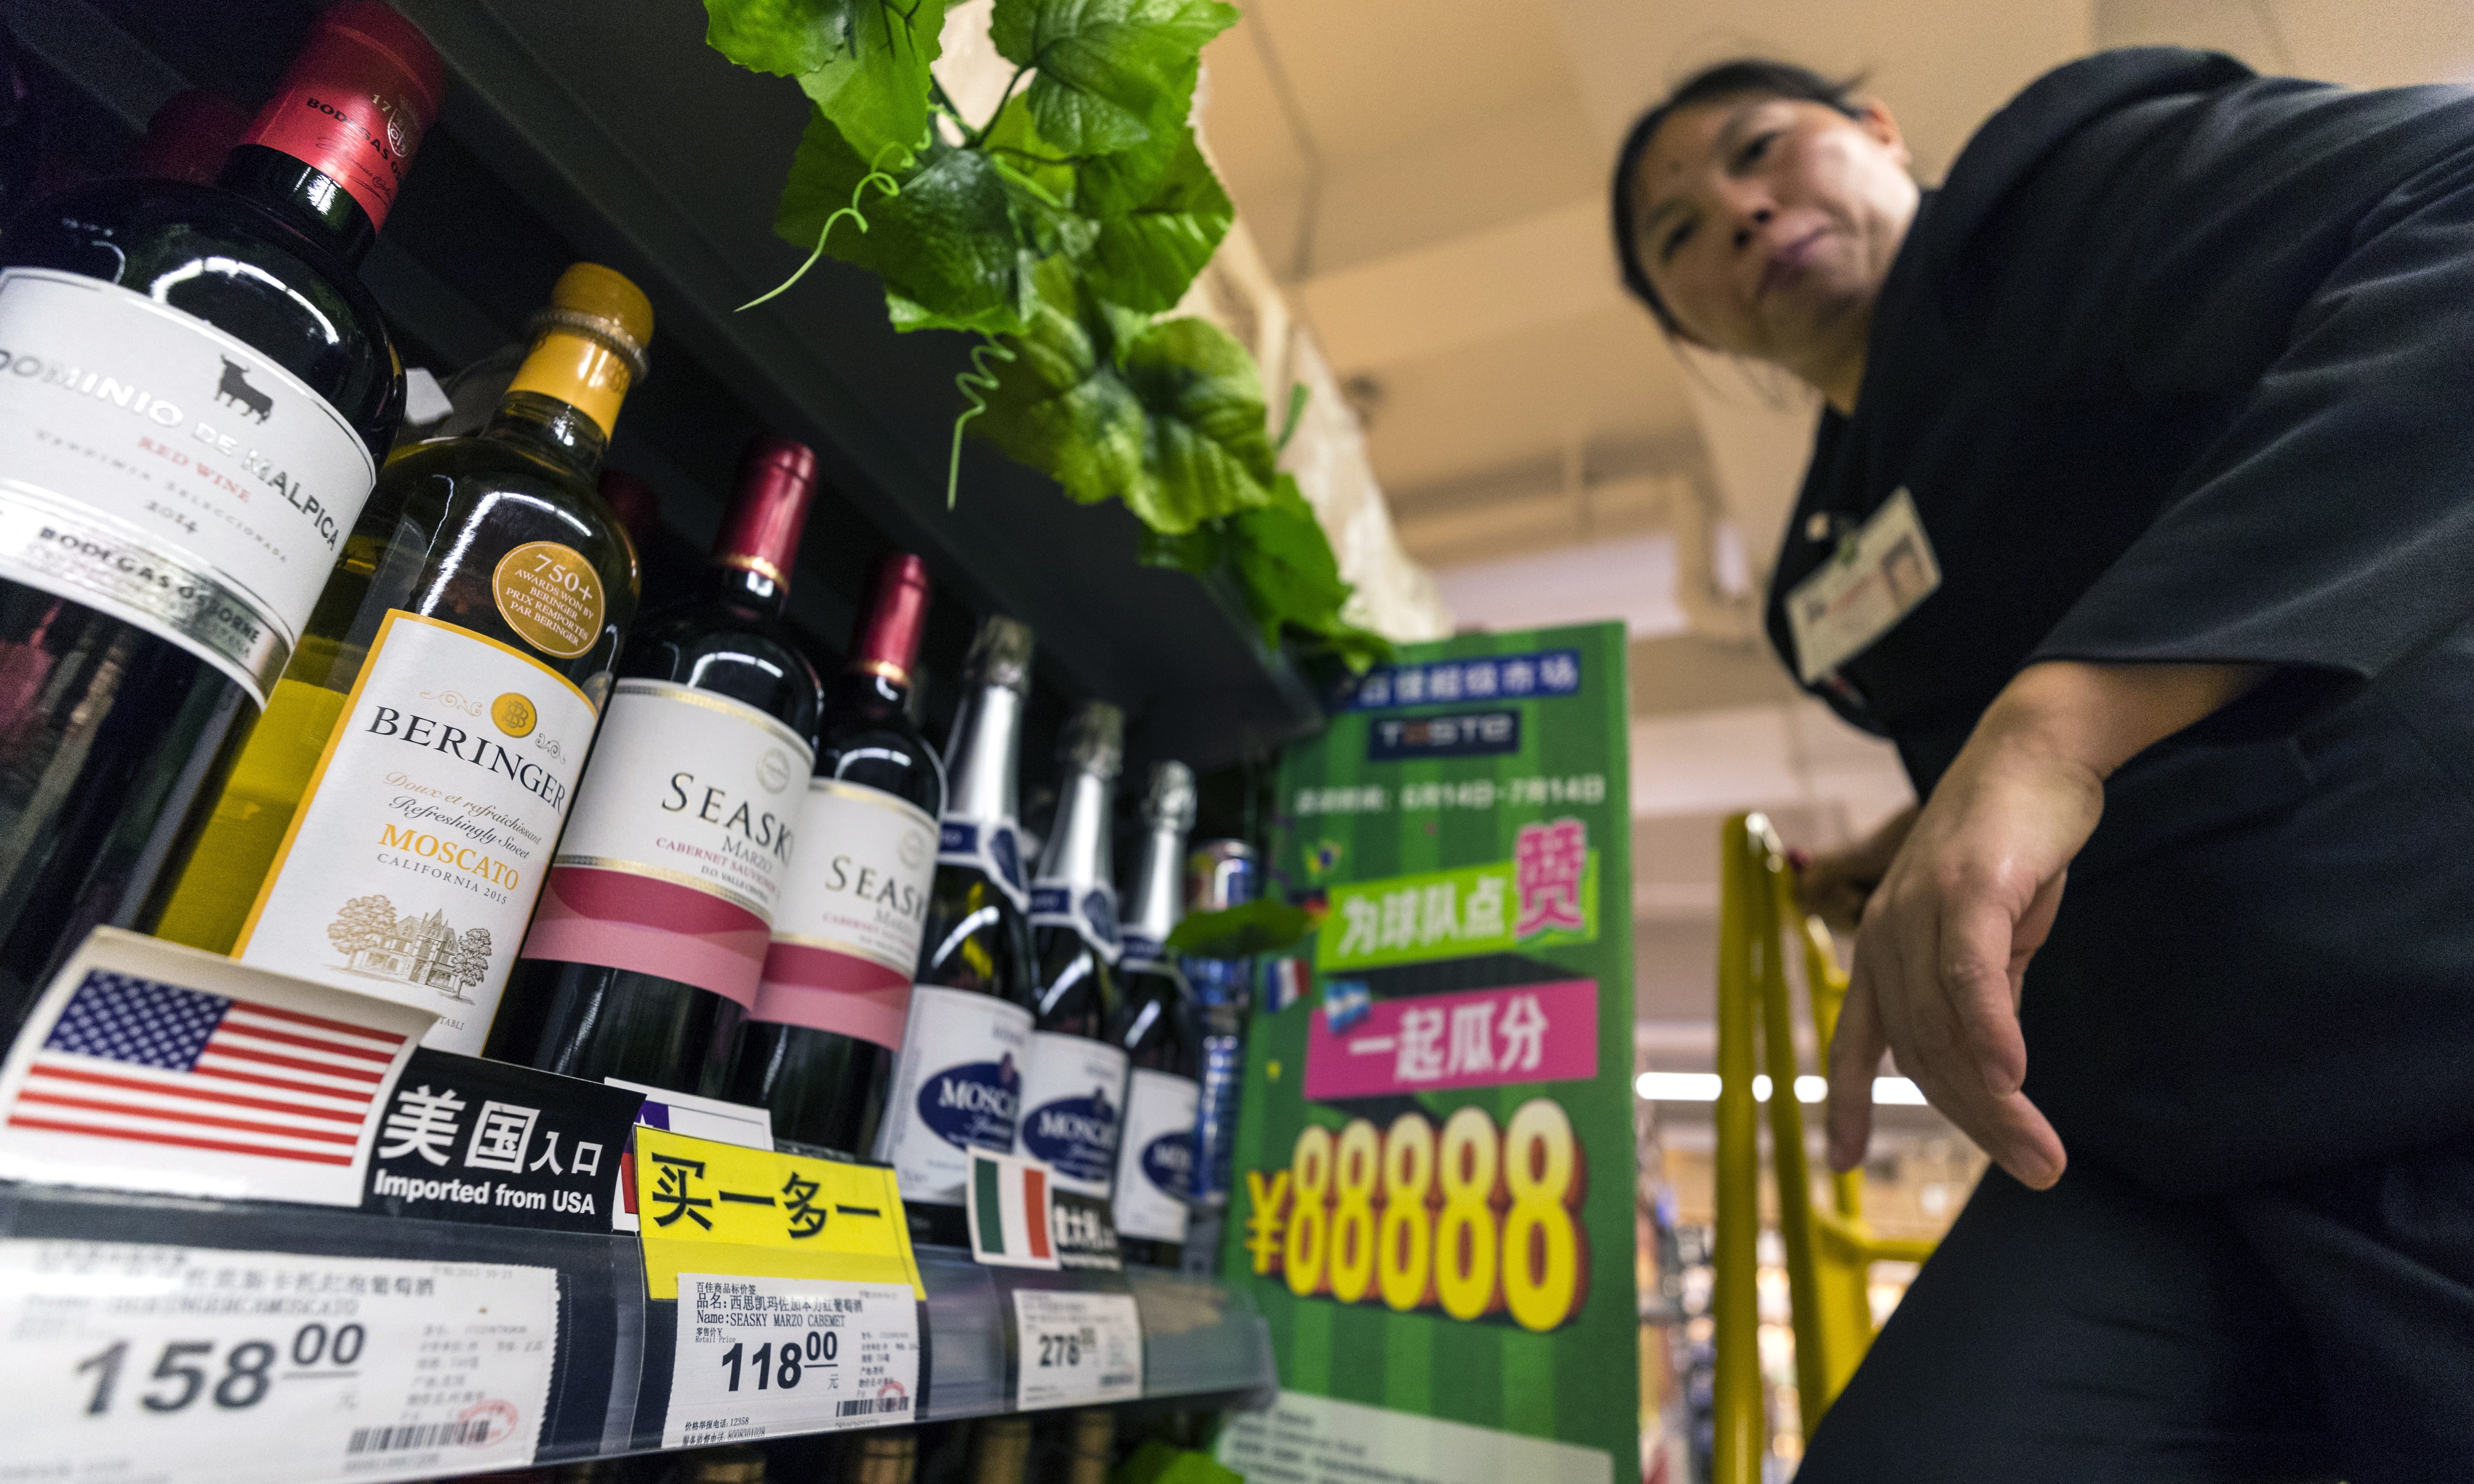 Bottles of wine imported from the US sit on a store shelf in Guangzhou on July 14. Politicians get agitated over the fact that most consumers pay attention only to value for money in making their buying decisions, caring little where the goods come from. Photo: EPA-EFE